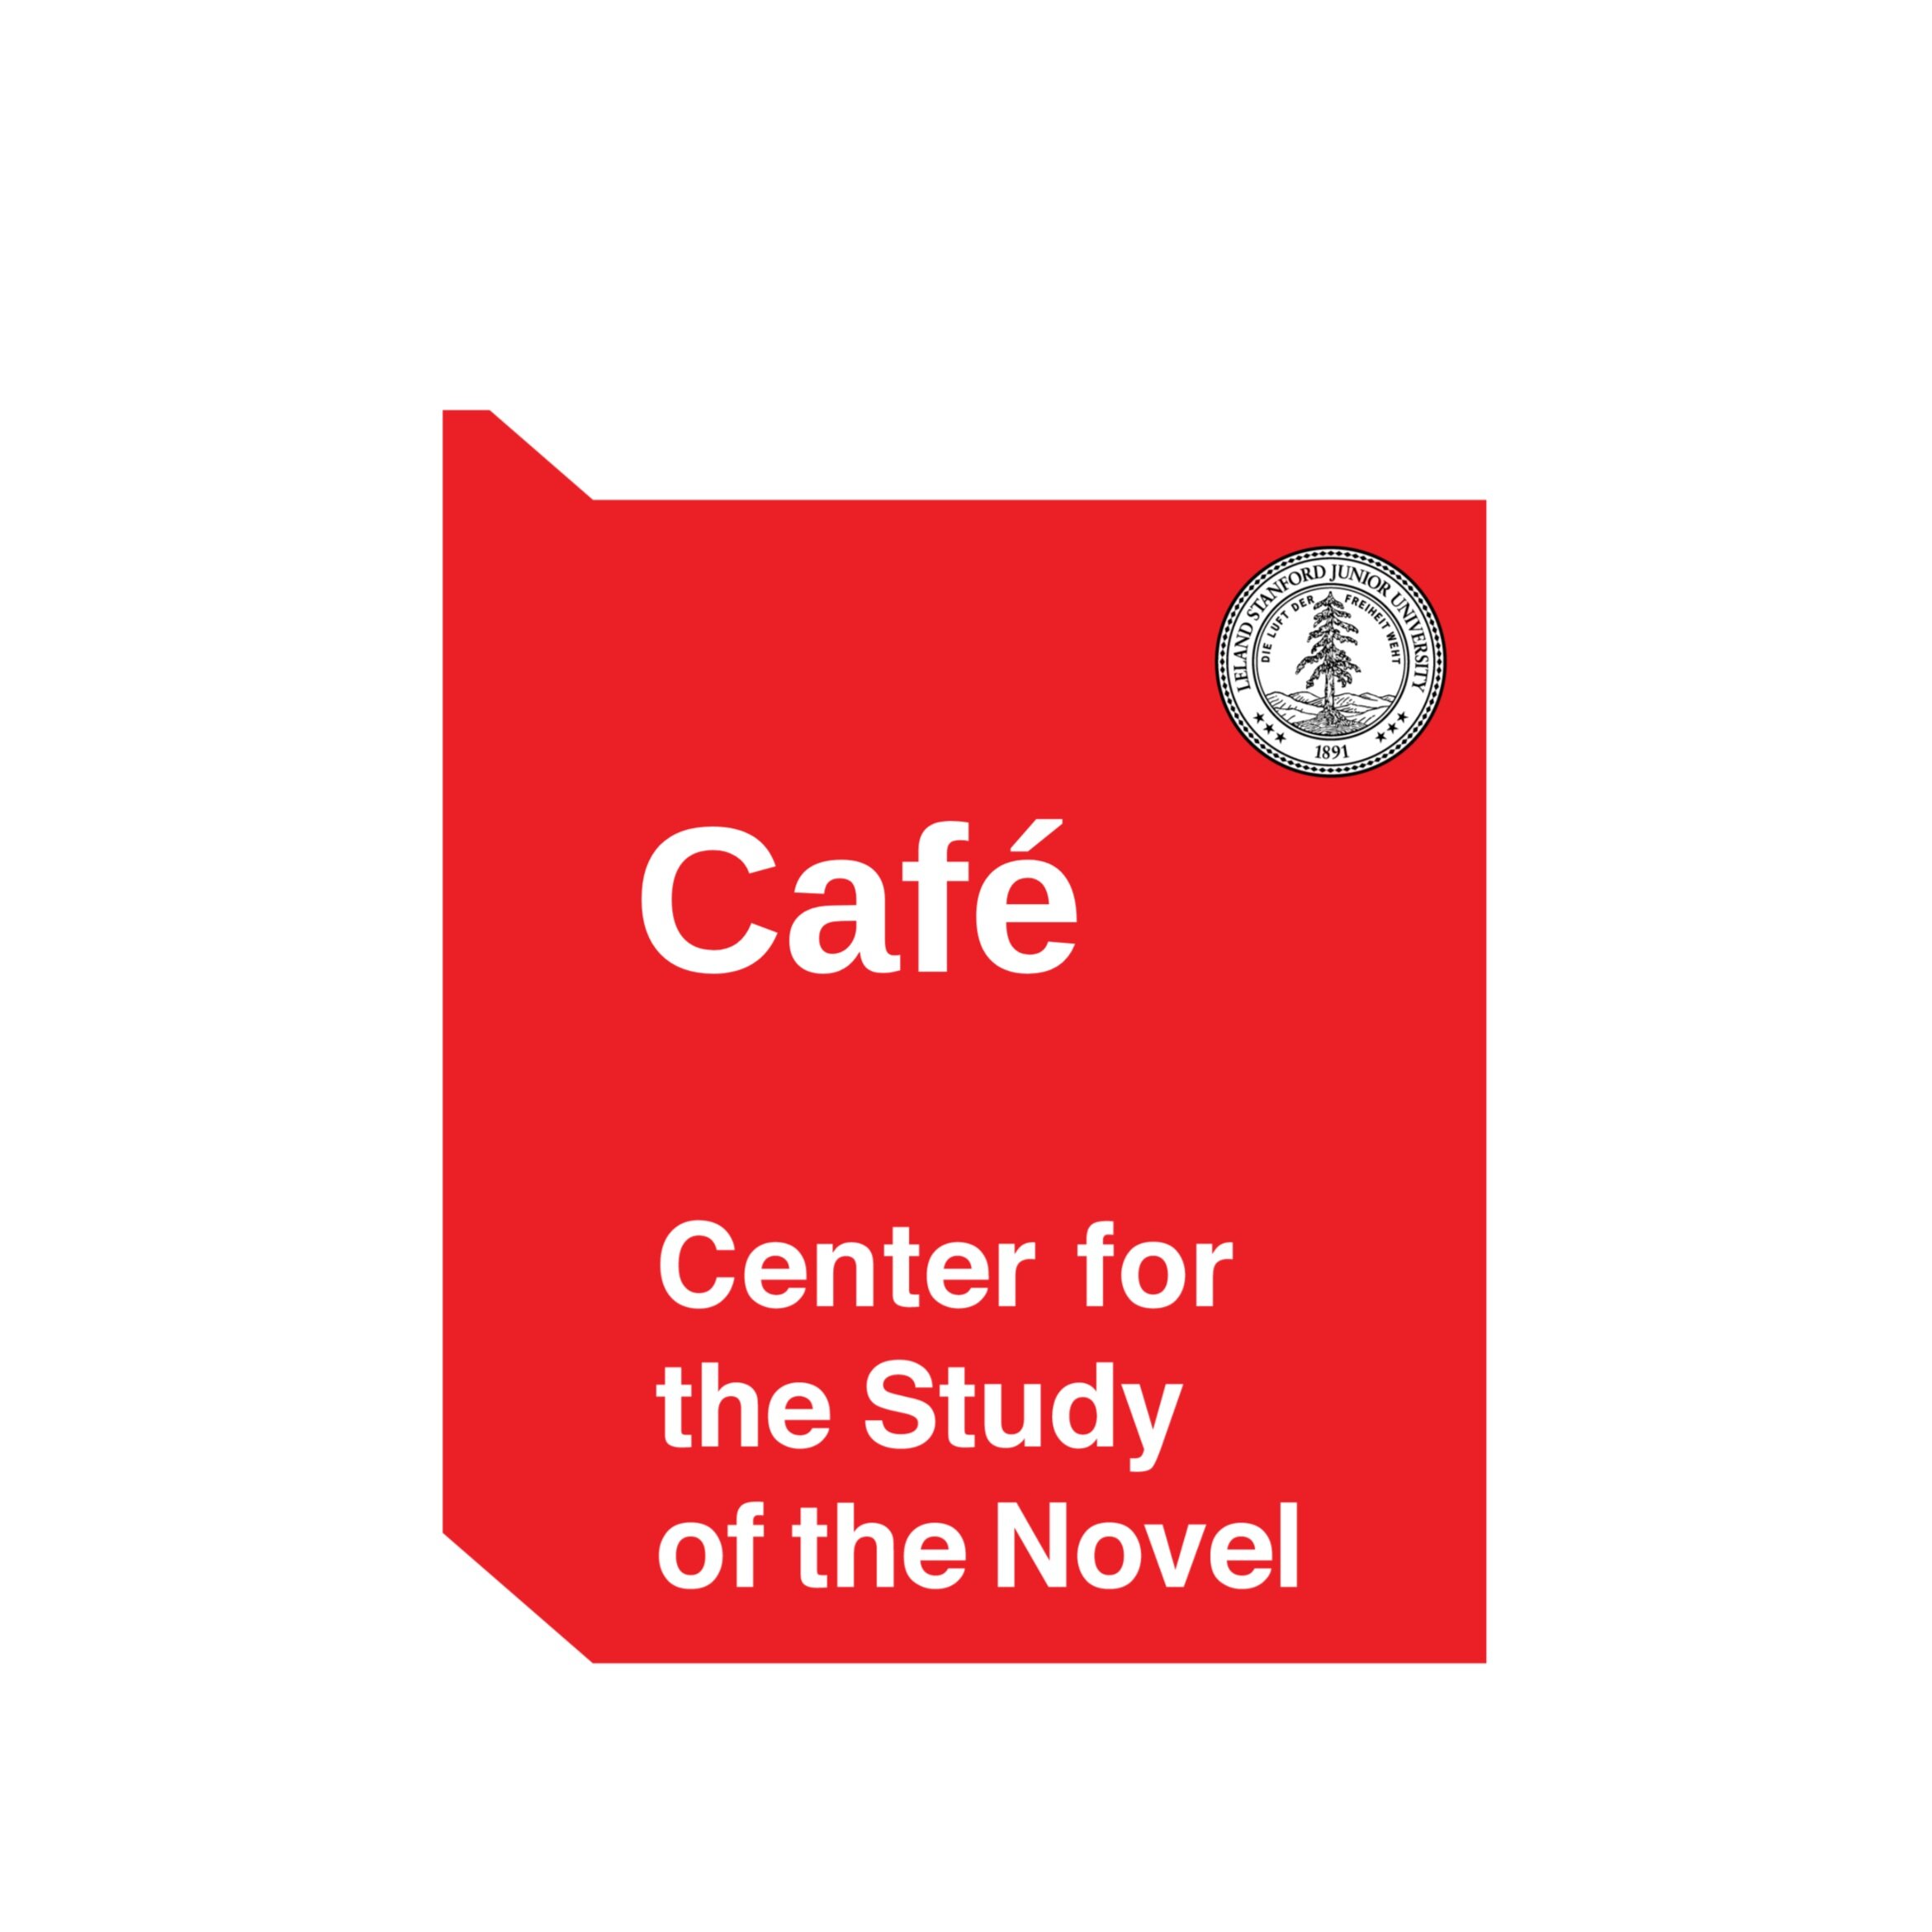 An interview podcast with guests of the Stanford Center for the Study of the Novel — Center for the Study of the Novel